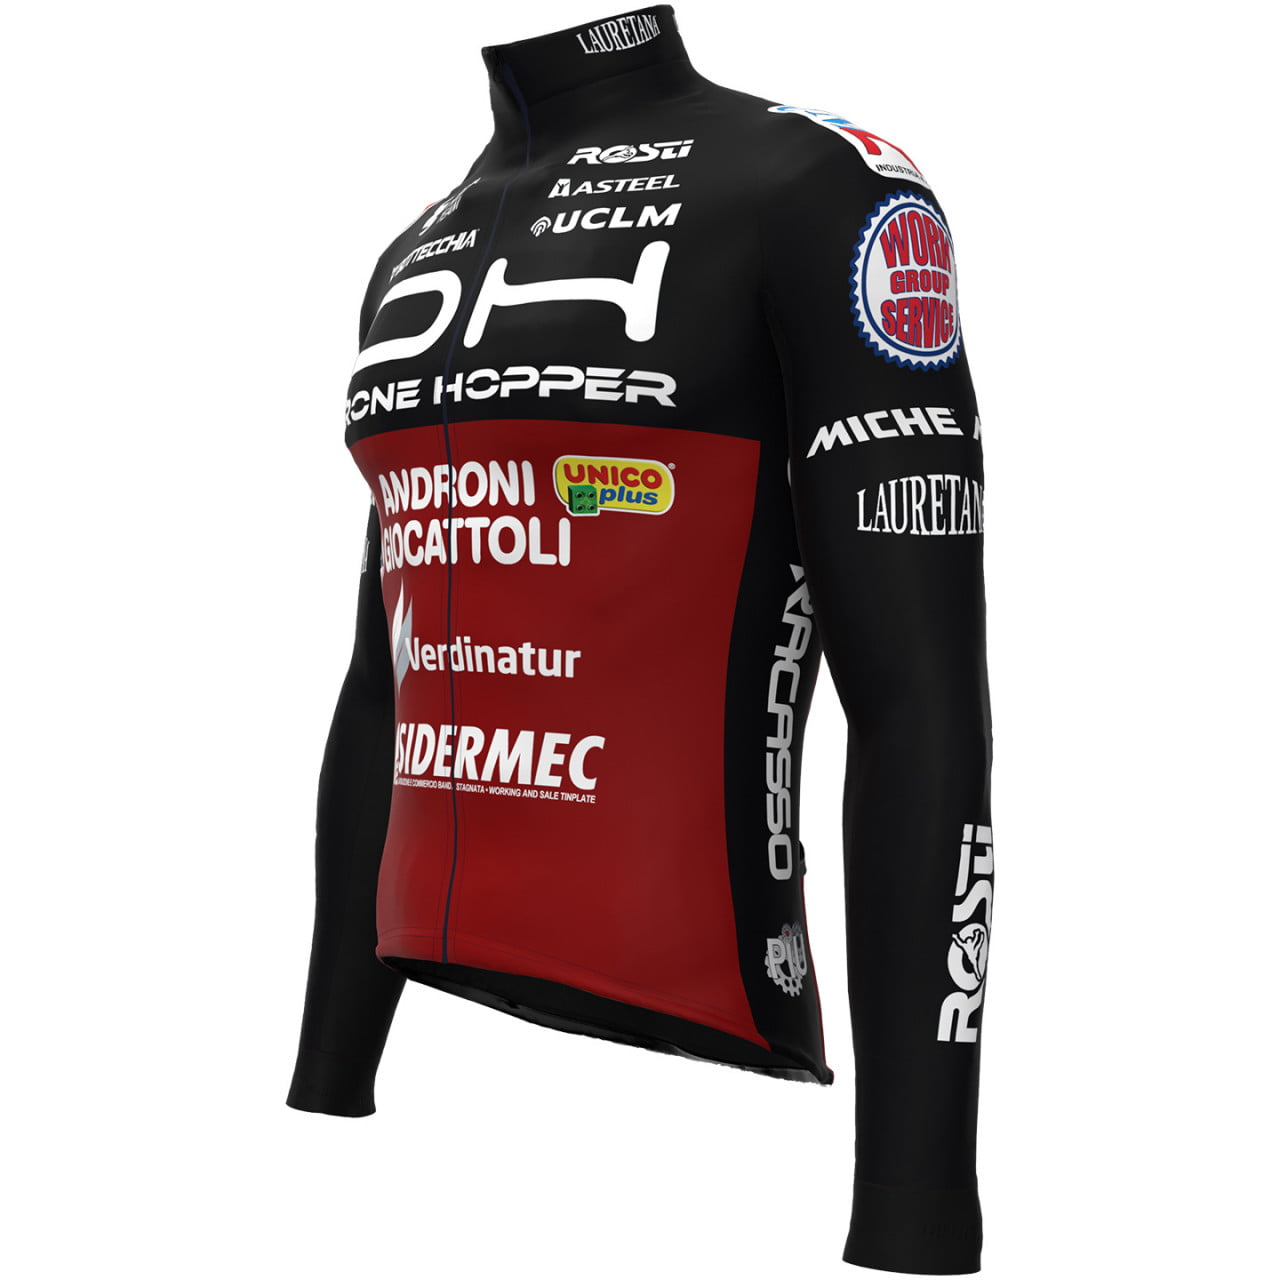 Maillot manches longues DRONE HOPPER - ANDRONI GIOCATTOLI 2022